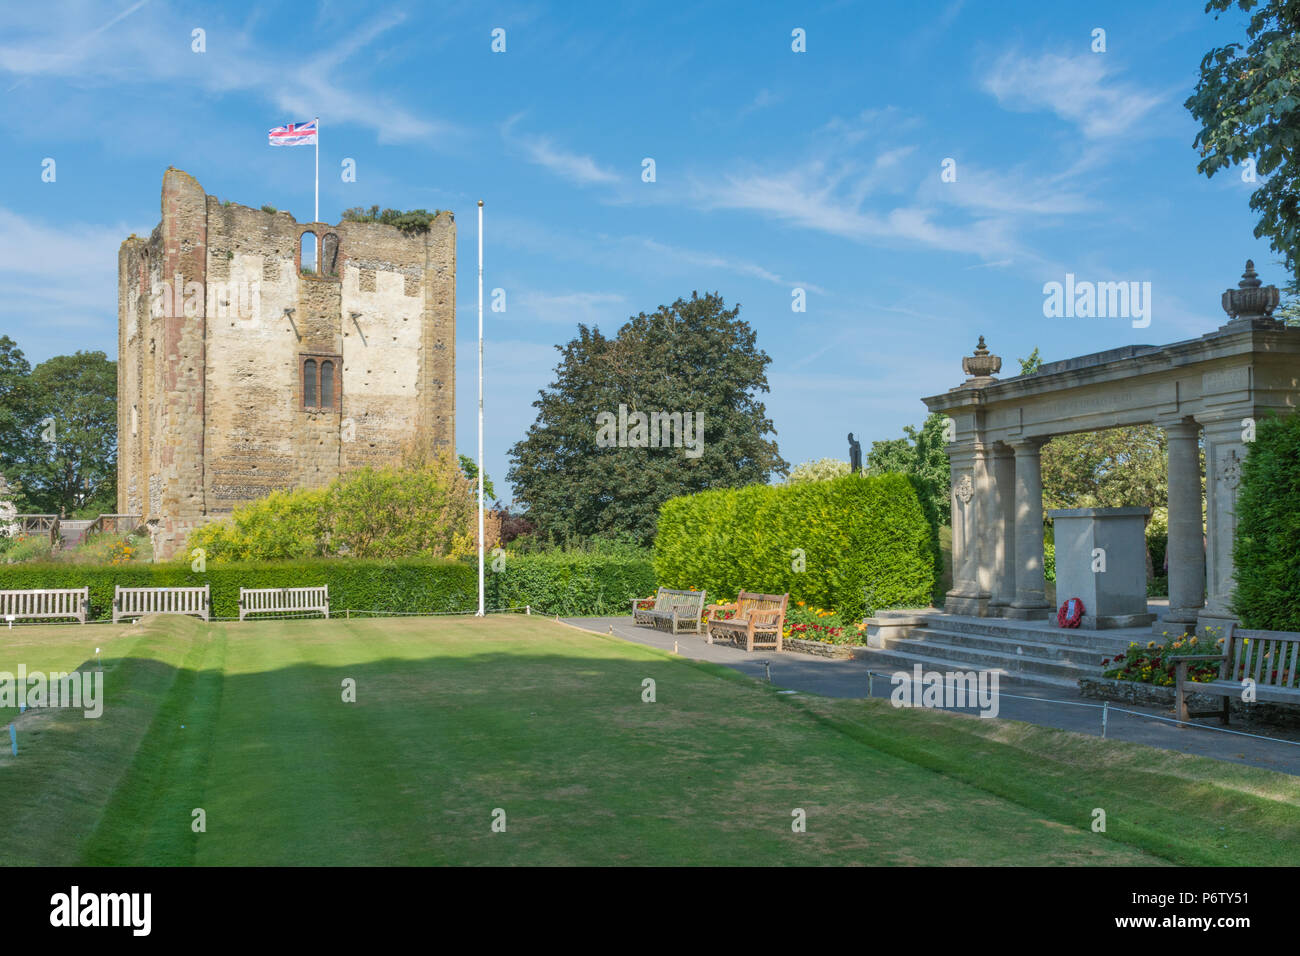 The castle grounds in Guildford, Surrey, UK on a sunny summer day, with the castle keep, bowling green and war memorial arch Stock Photo